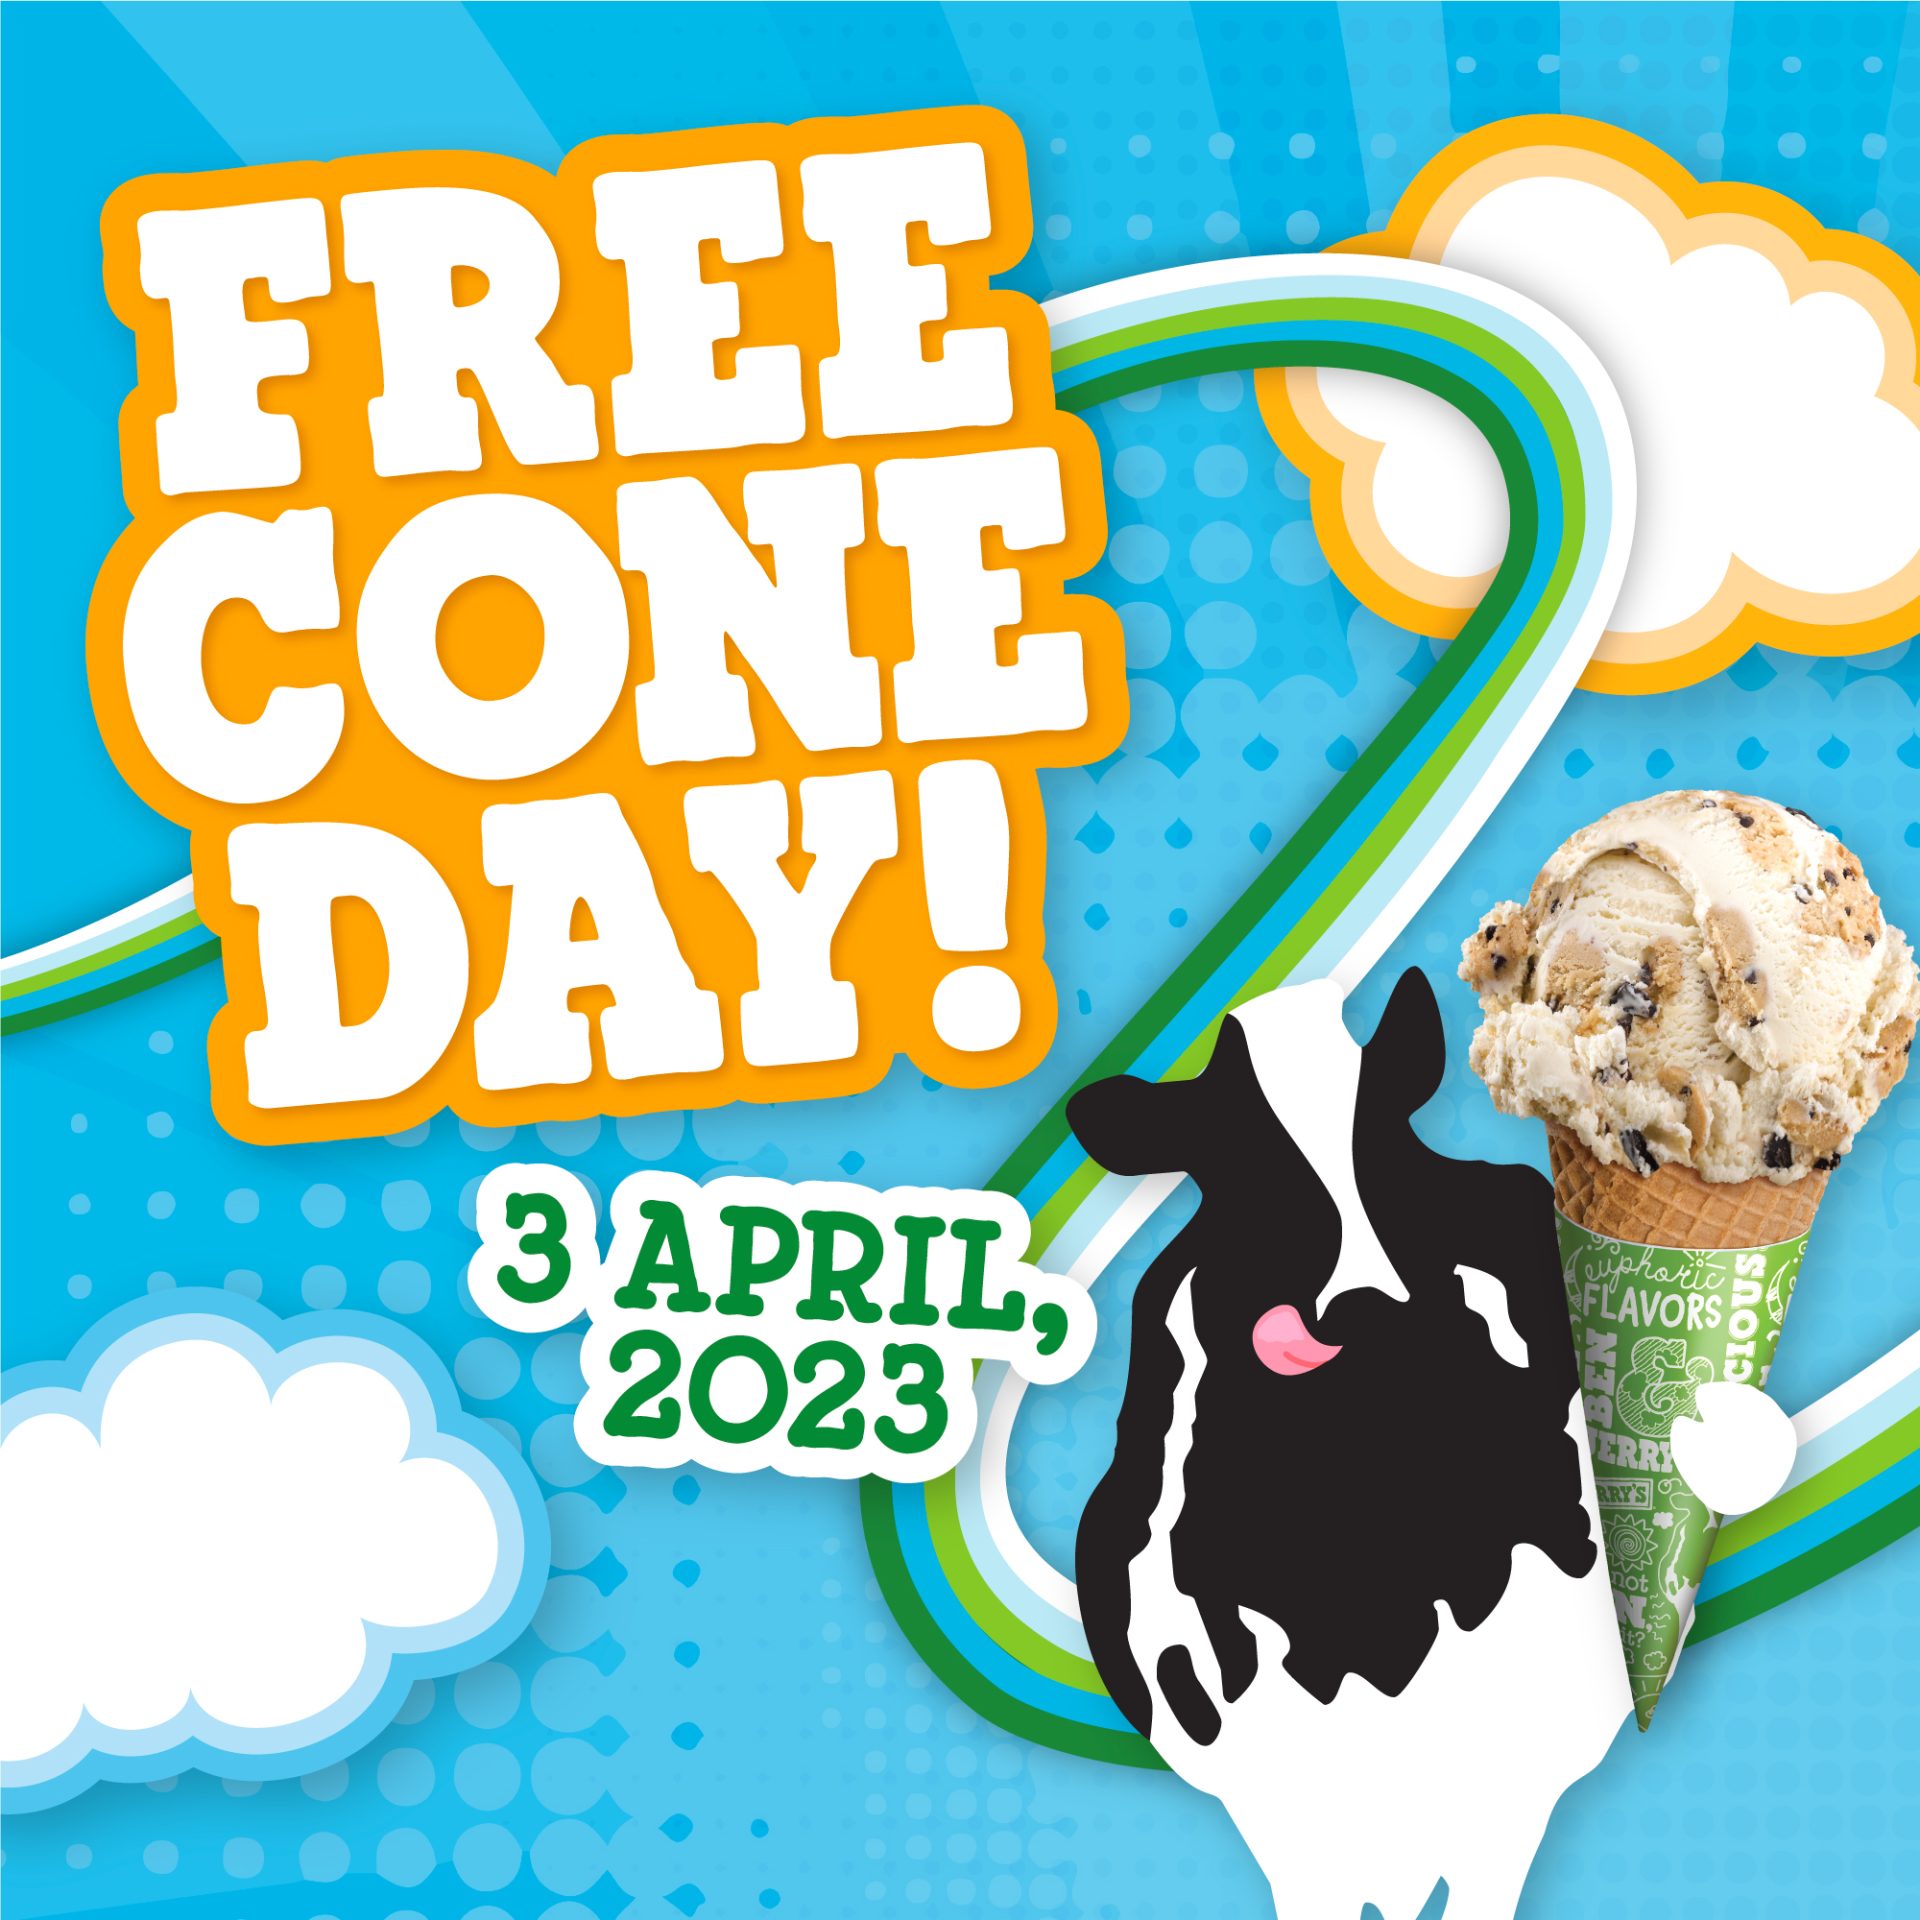 Ben & Jerry's Singapore - Free Cone Day promotional poster 